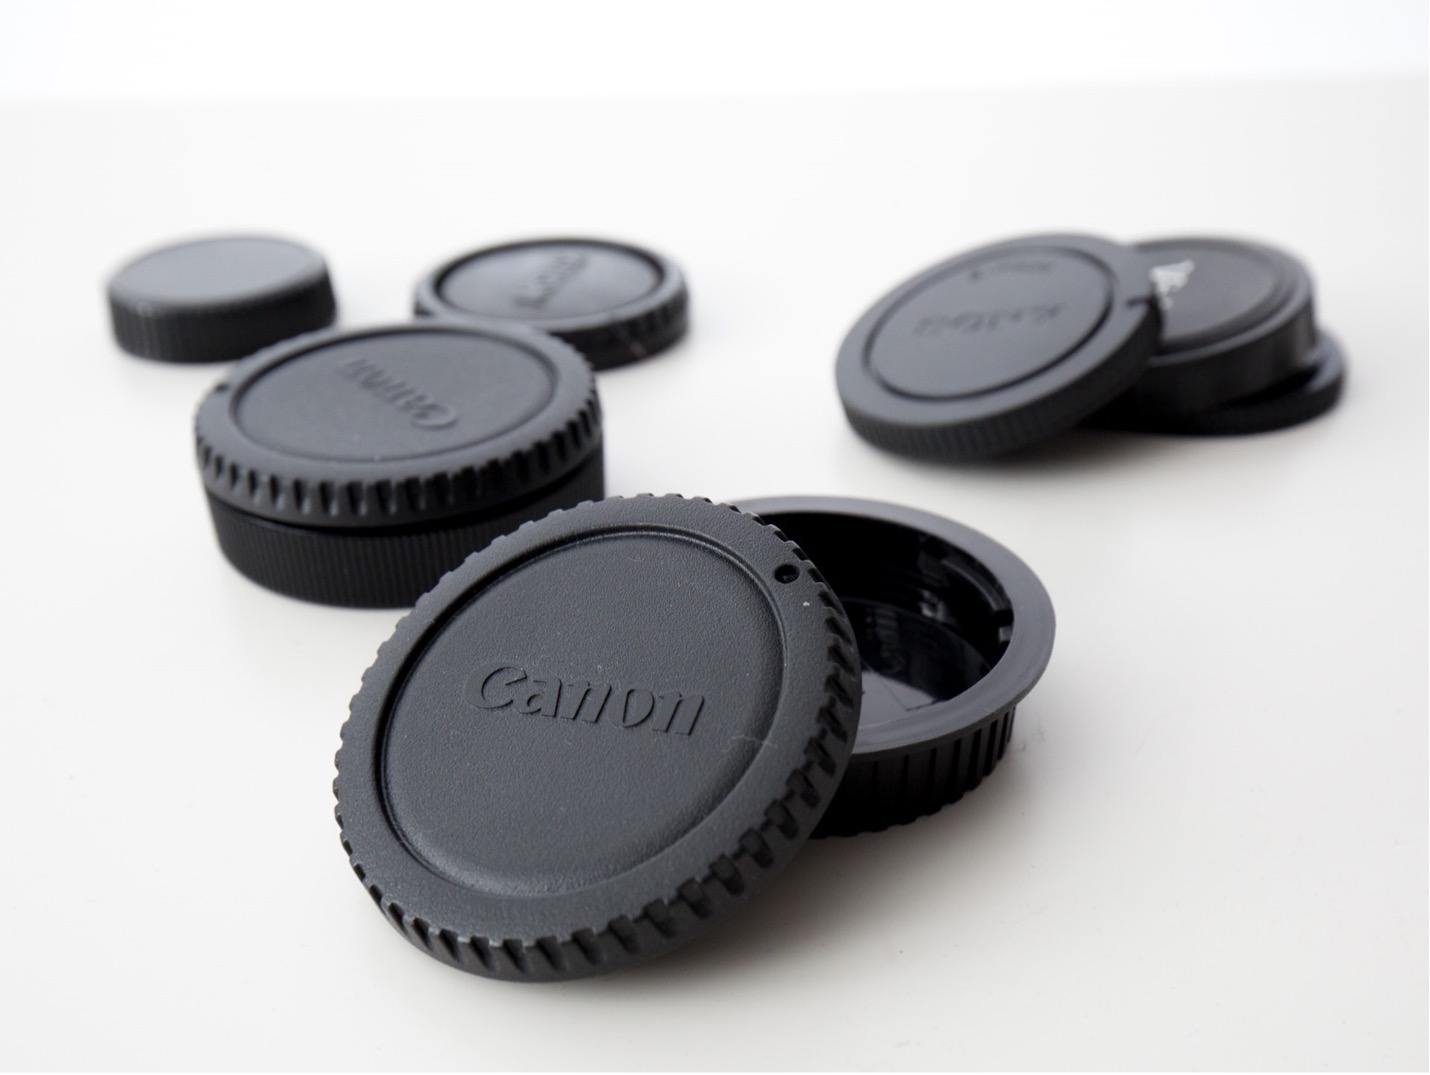 Camera body and lens body caps go hand-in-hand.